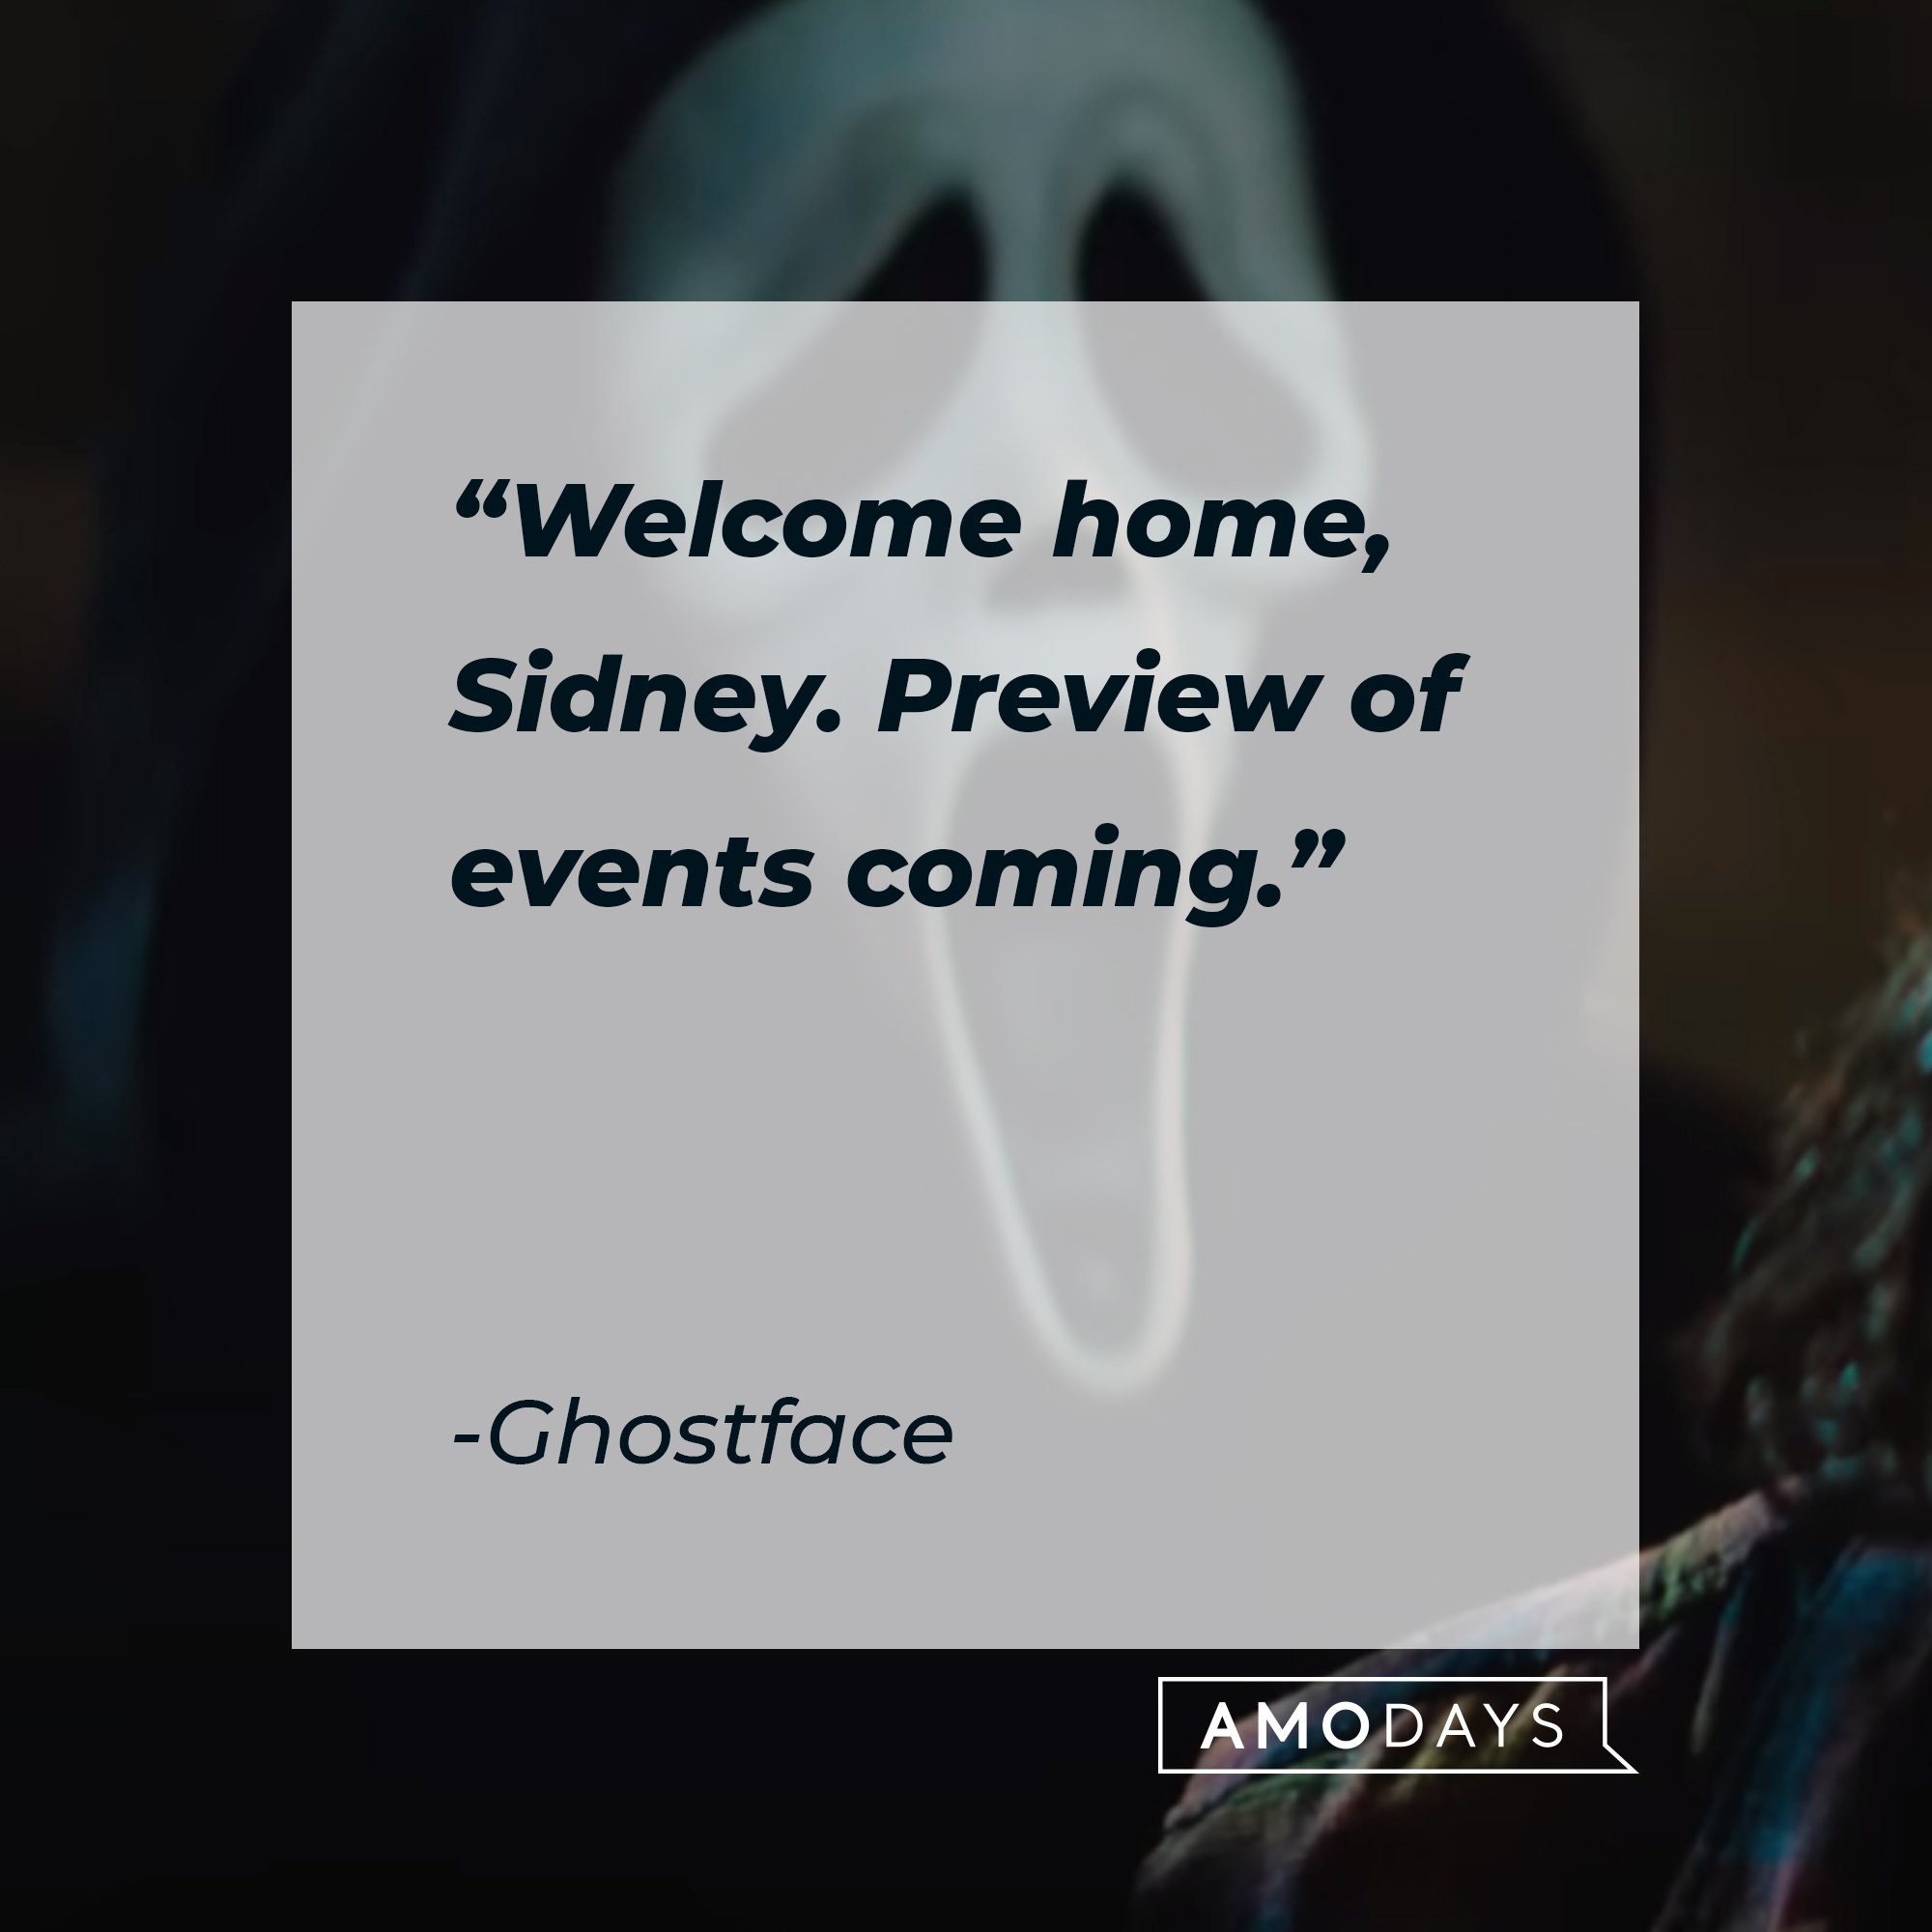 Ghostface’s quote: "Welcome home, Sidney. Preview of events coming." | Image: AmoDays